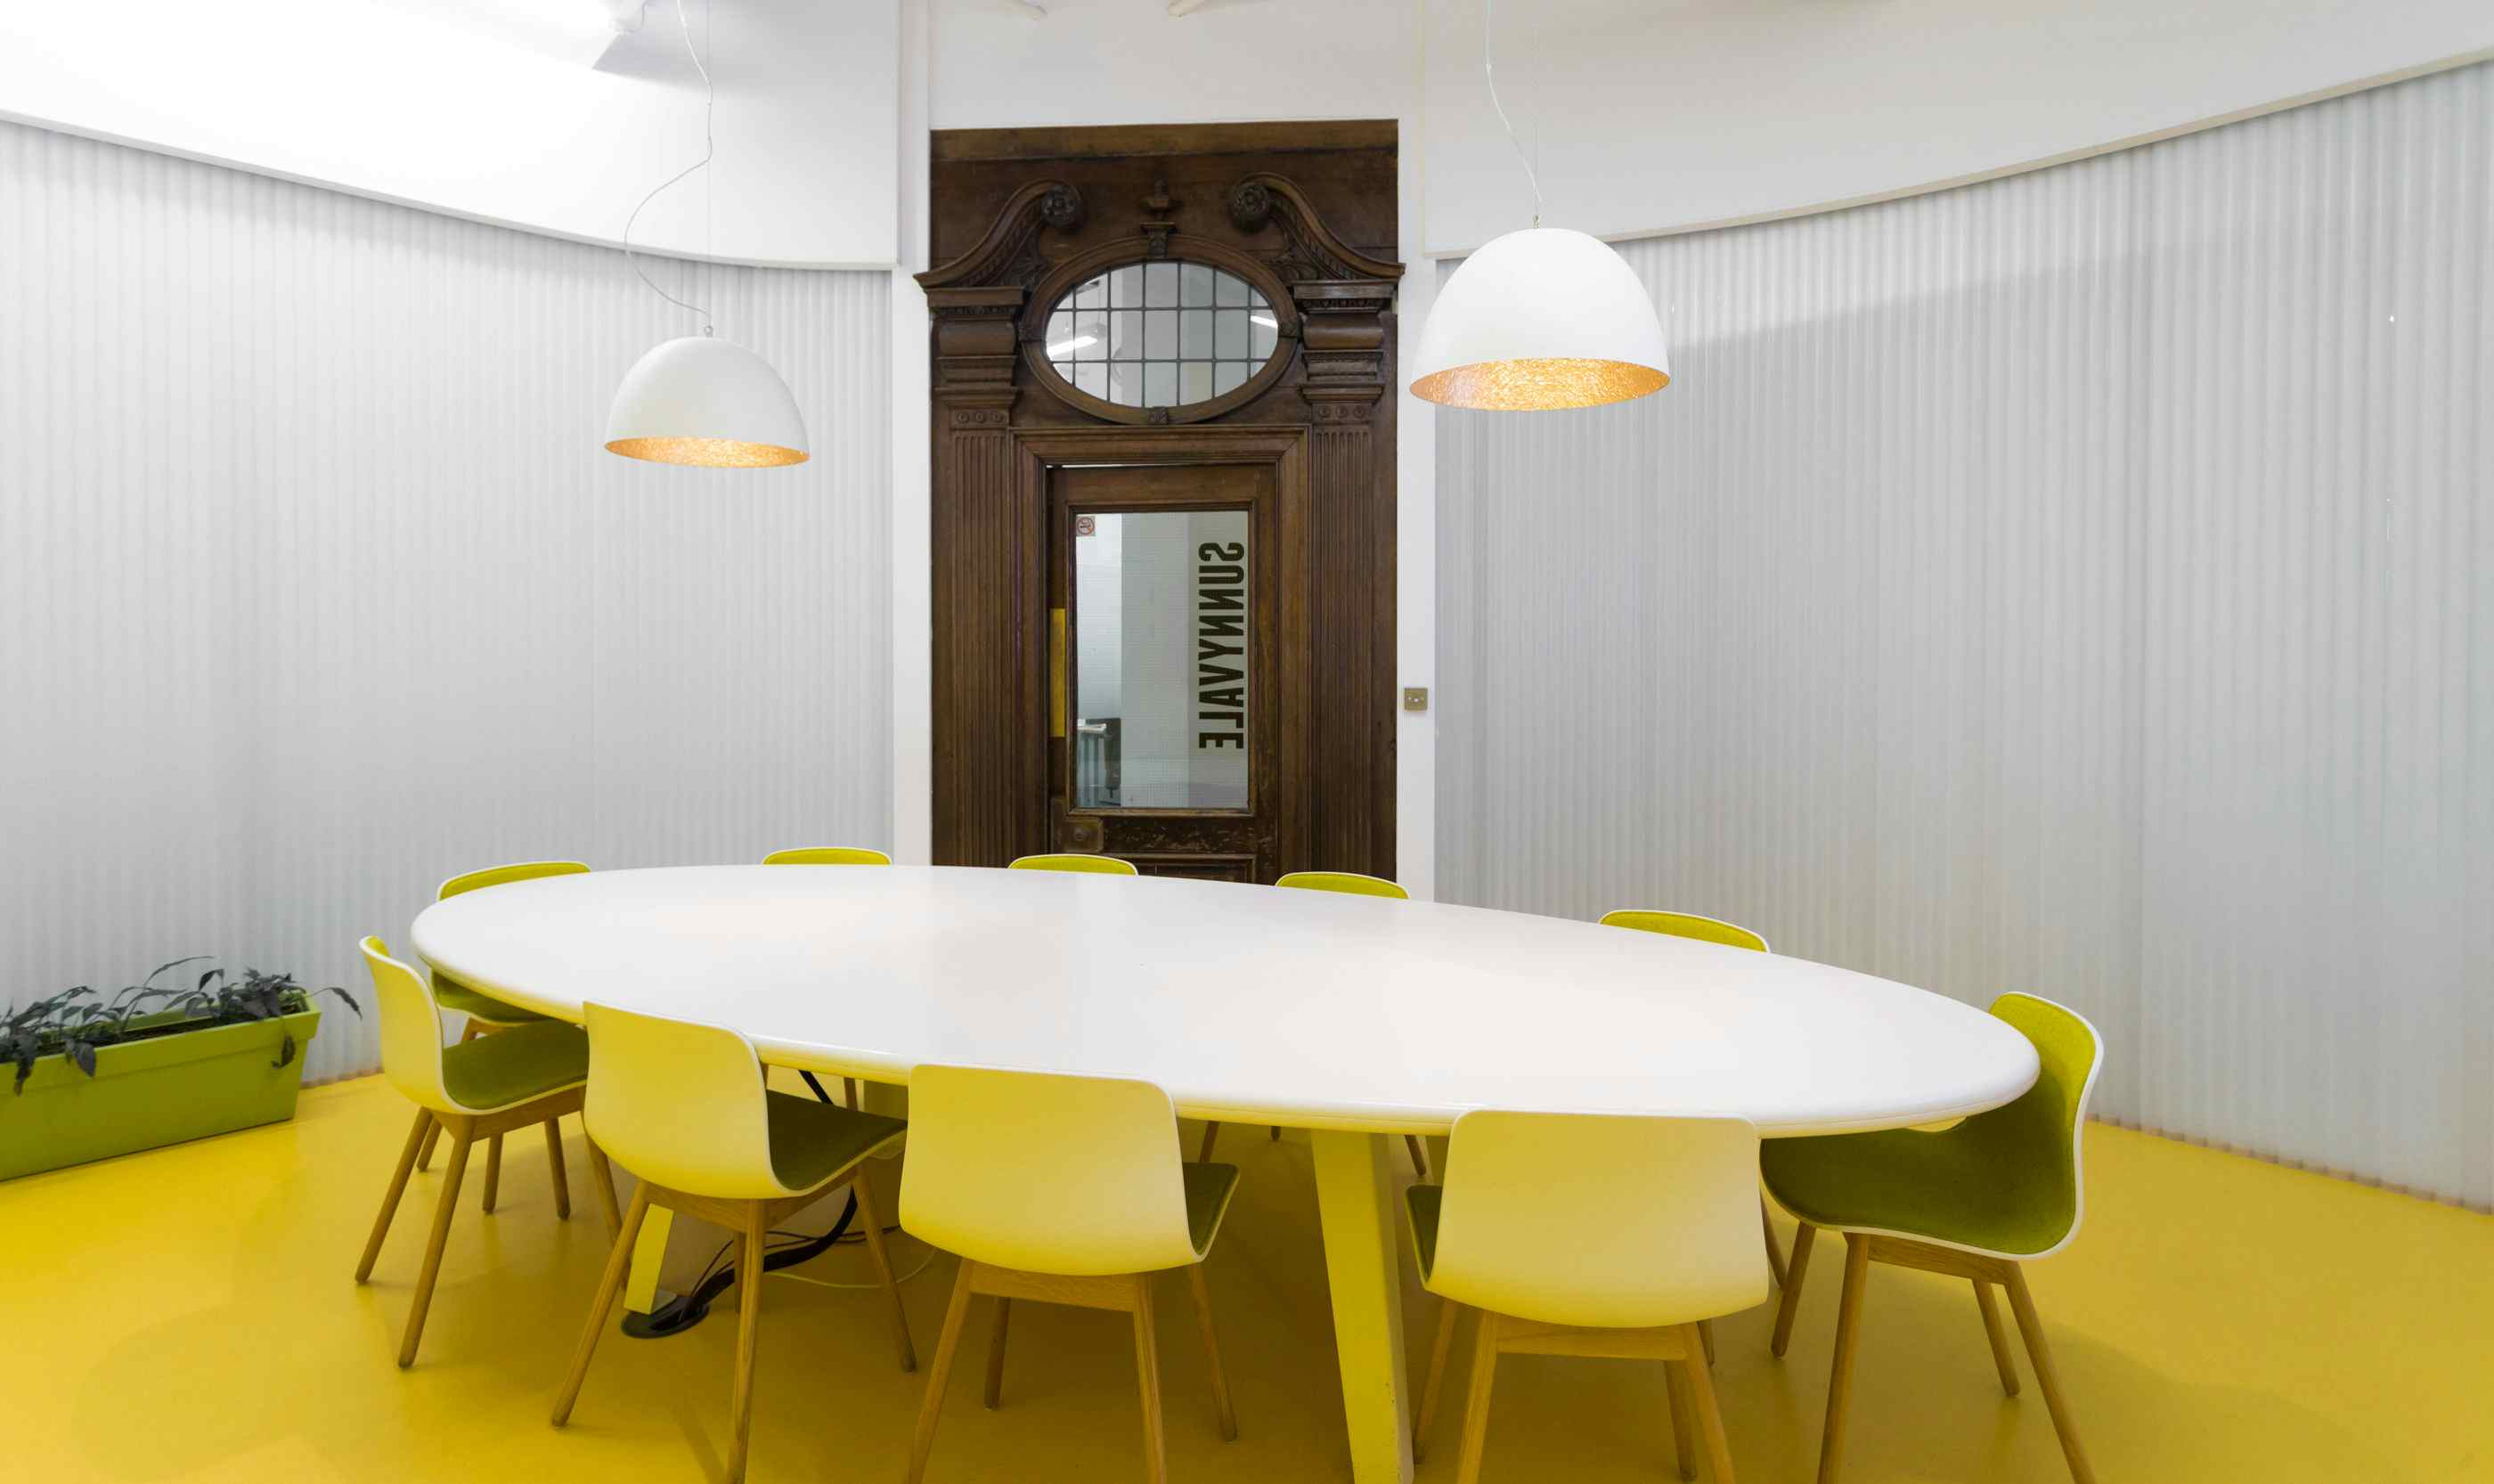 Sunnyvale Meeting Room, Huckletree Shoreditch